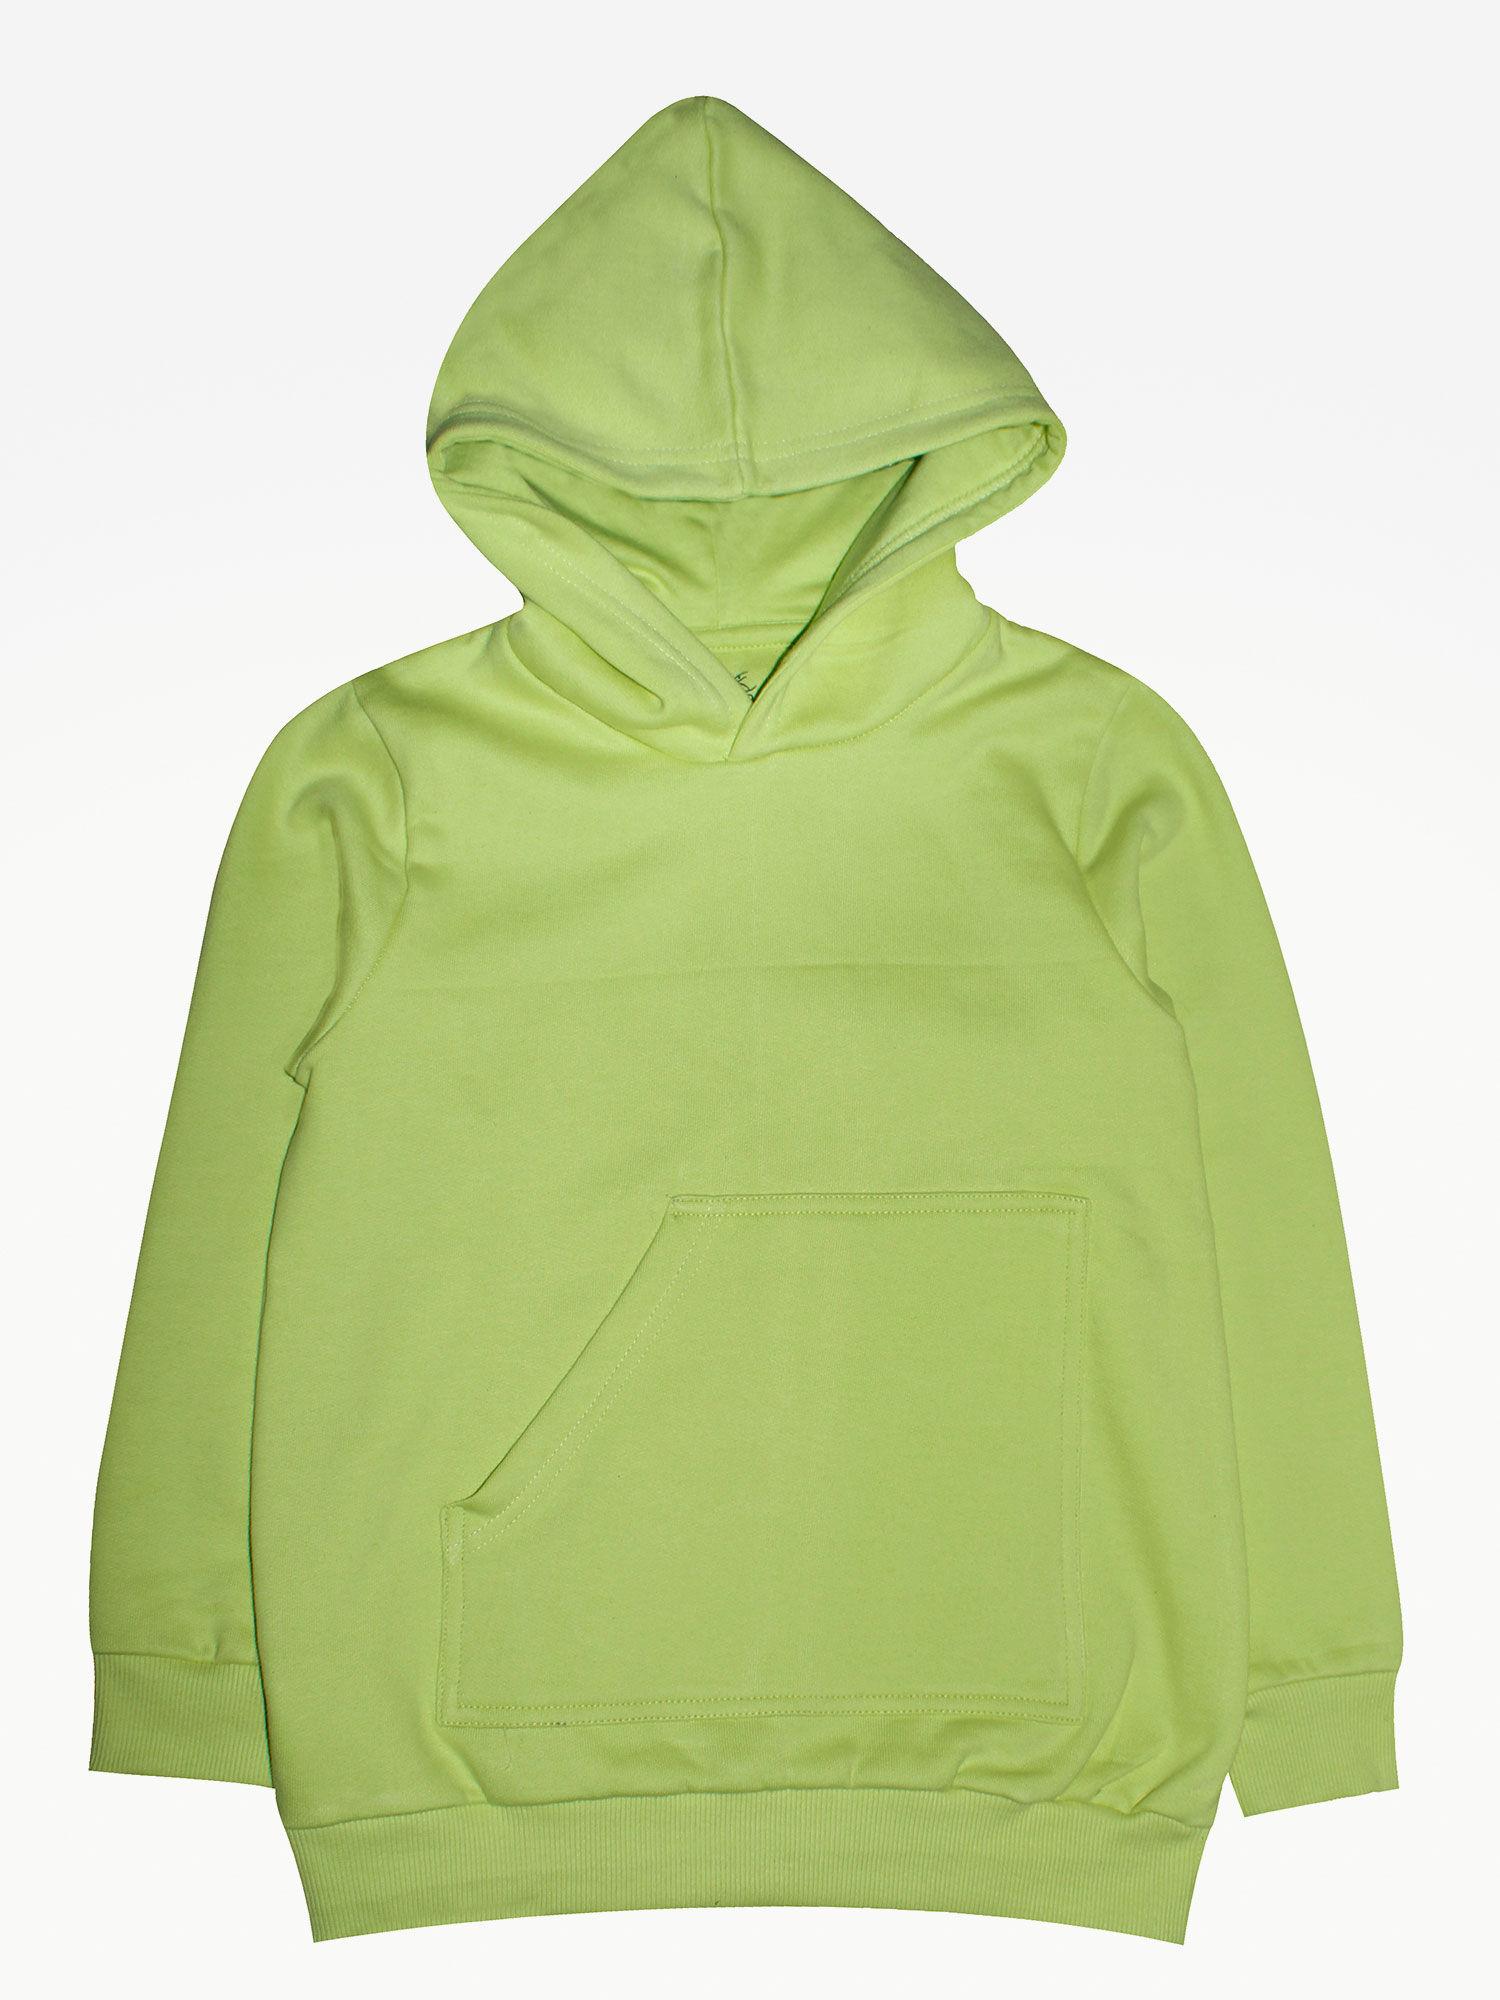 lime green solid hooded pull over sweatshirt